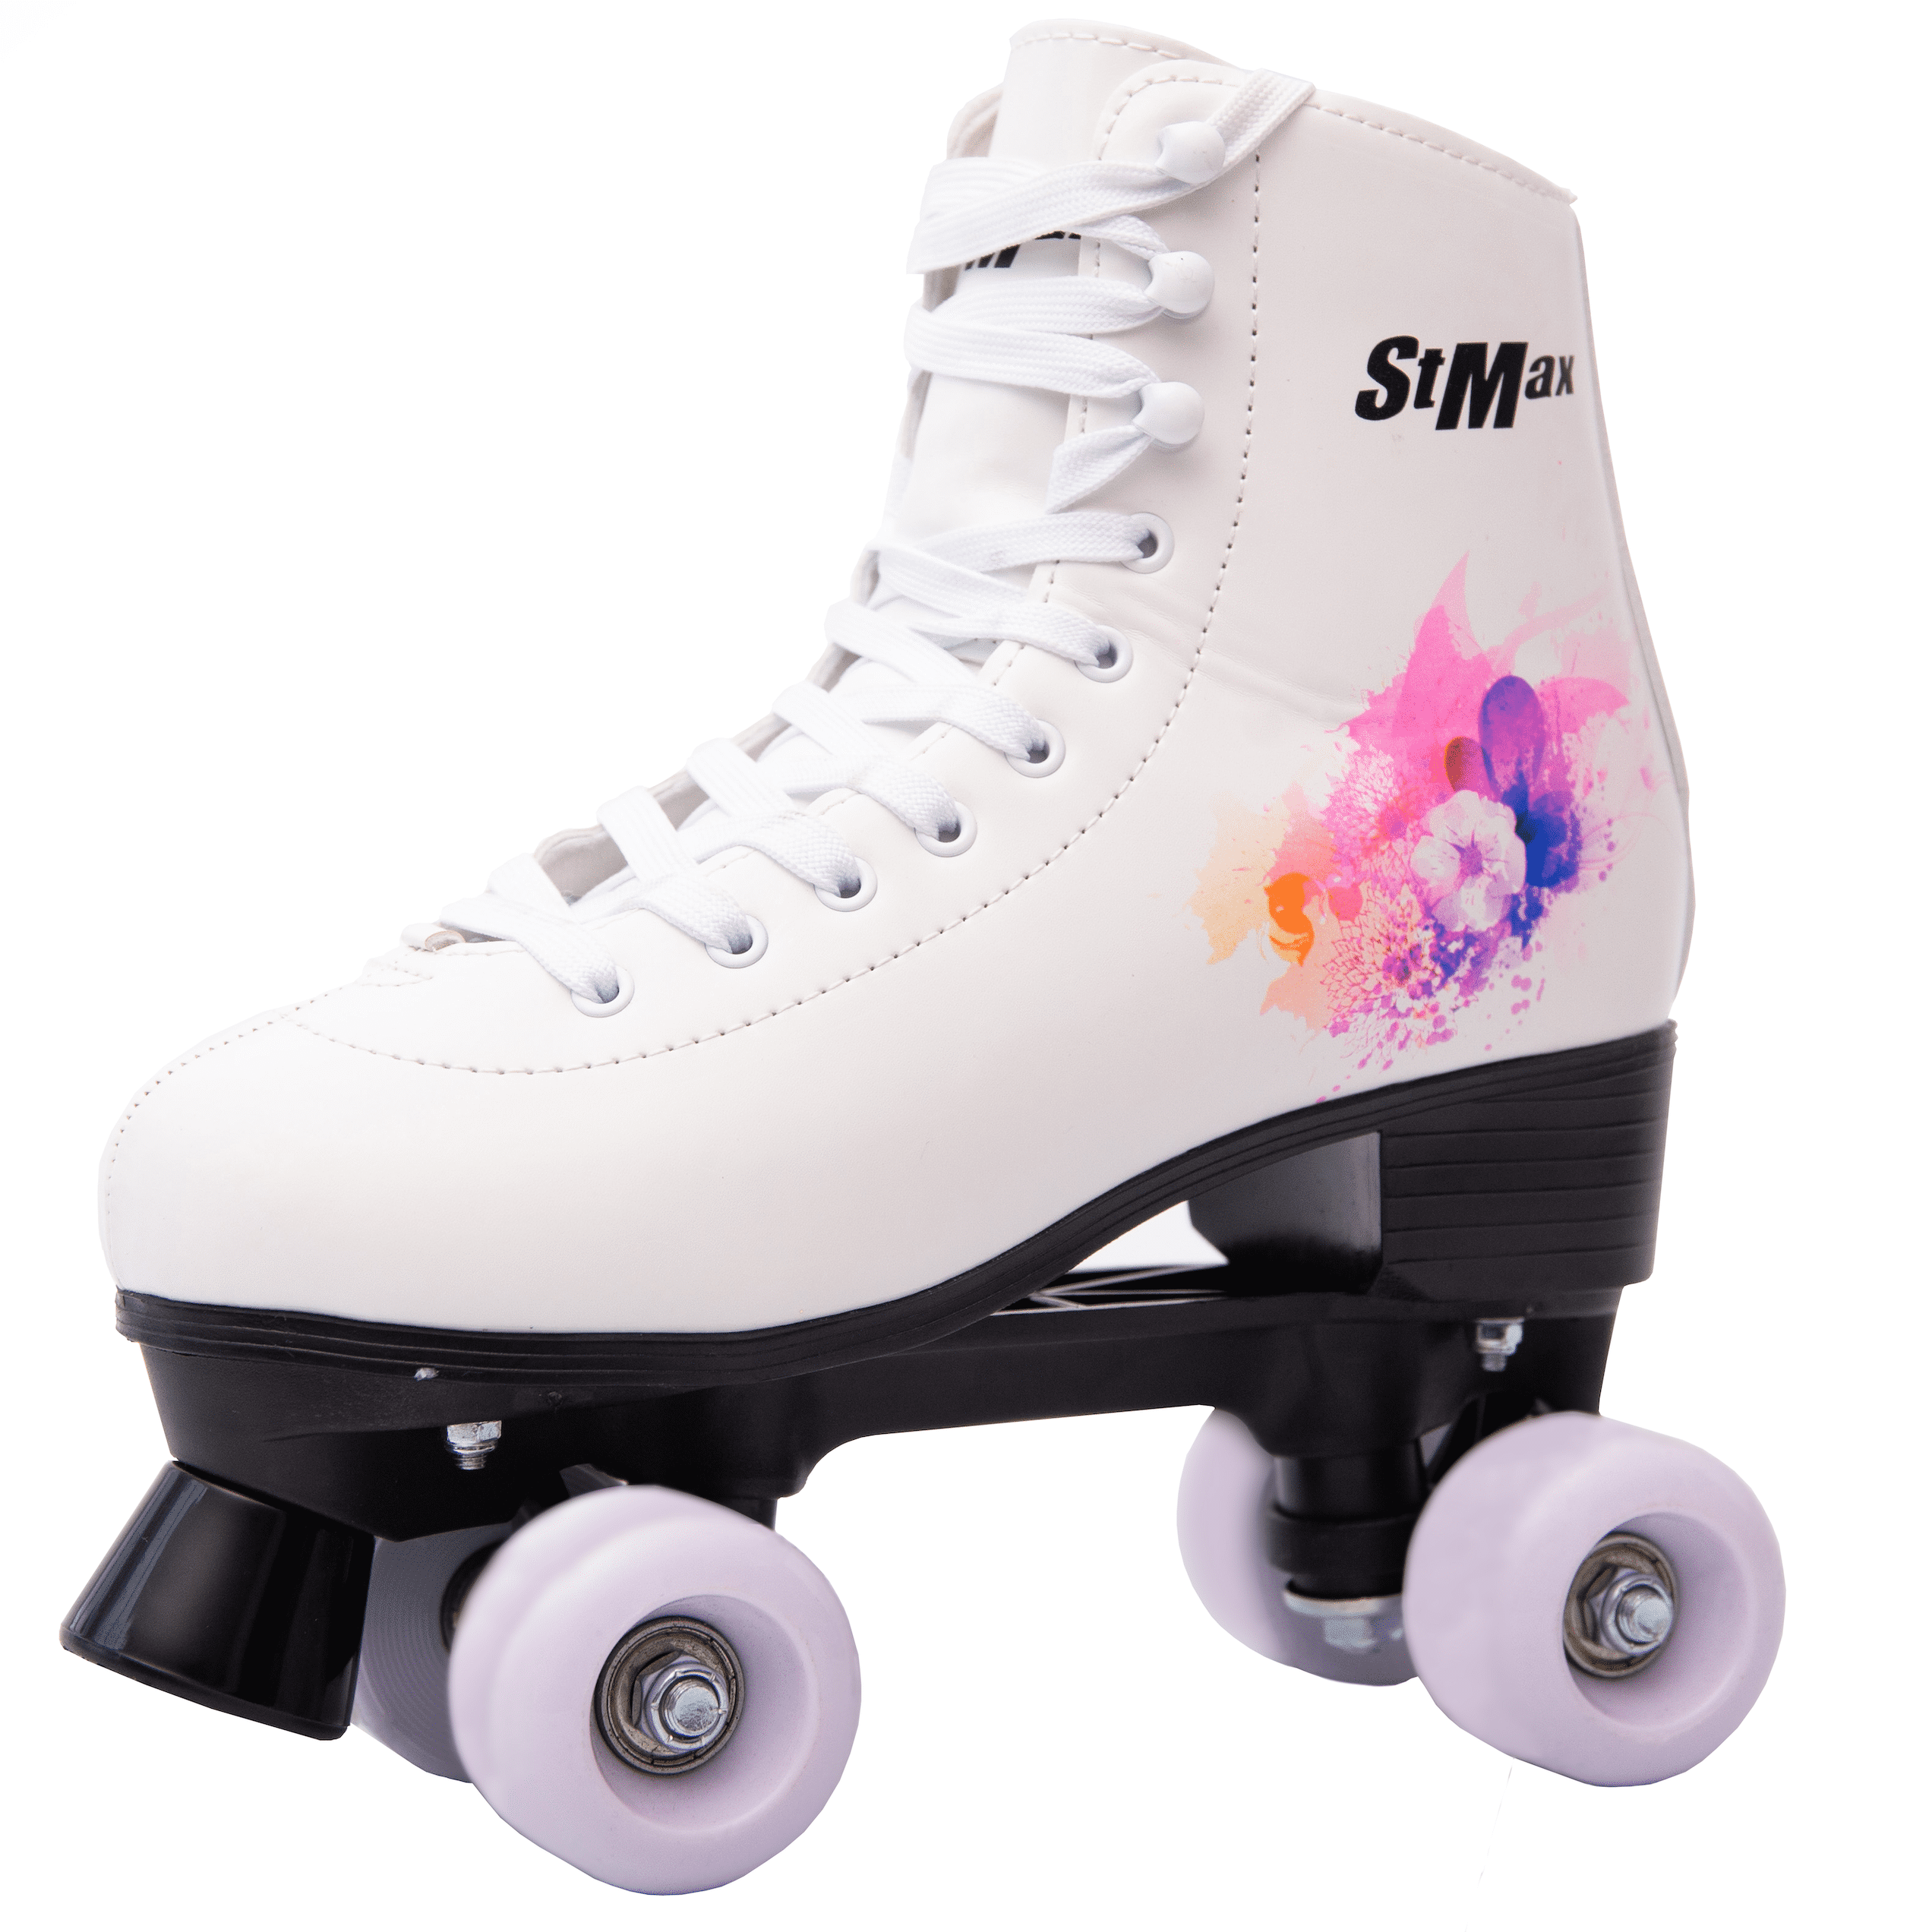 Quad Roller Skates for Girls and Women Size 8.5 Women White and pink Heart Derby 